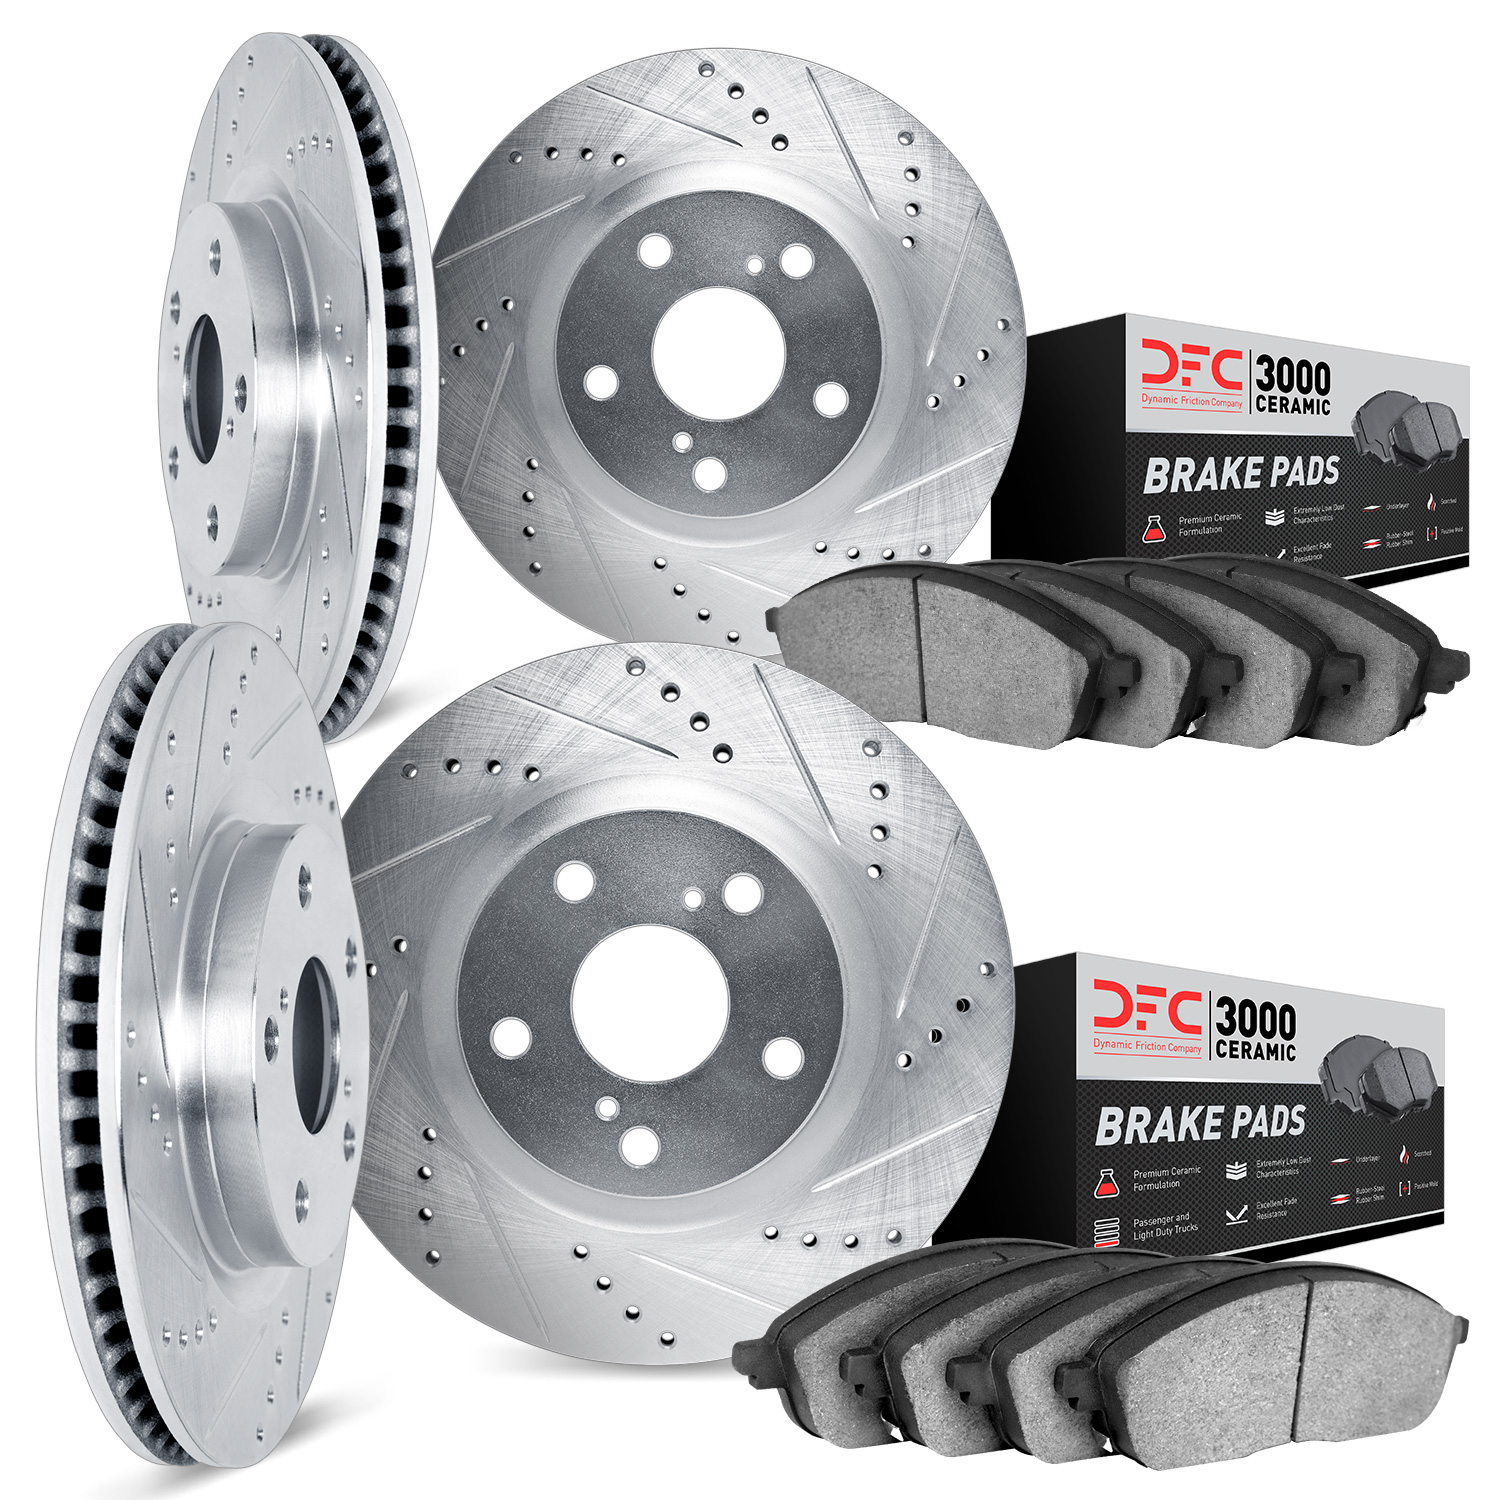 7304-75010 Drilled/Slotted Brake Rotor with 3000-Series Ceramic Brake Pads Kit [Silver], 2006-2013 Lexus/Toyota/Scion, Position: